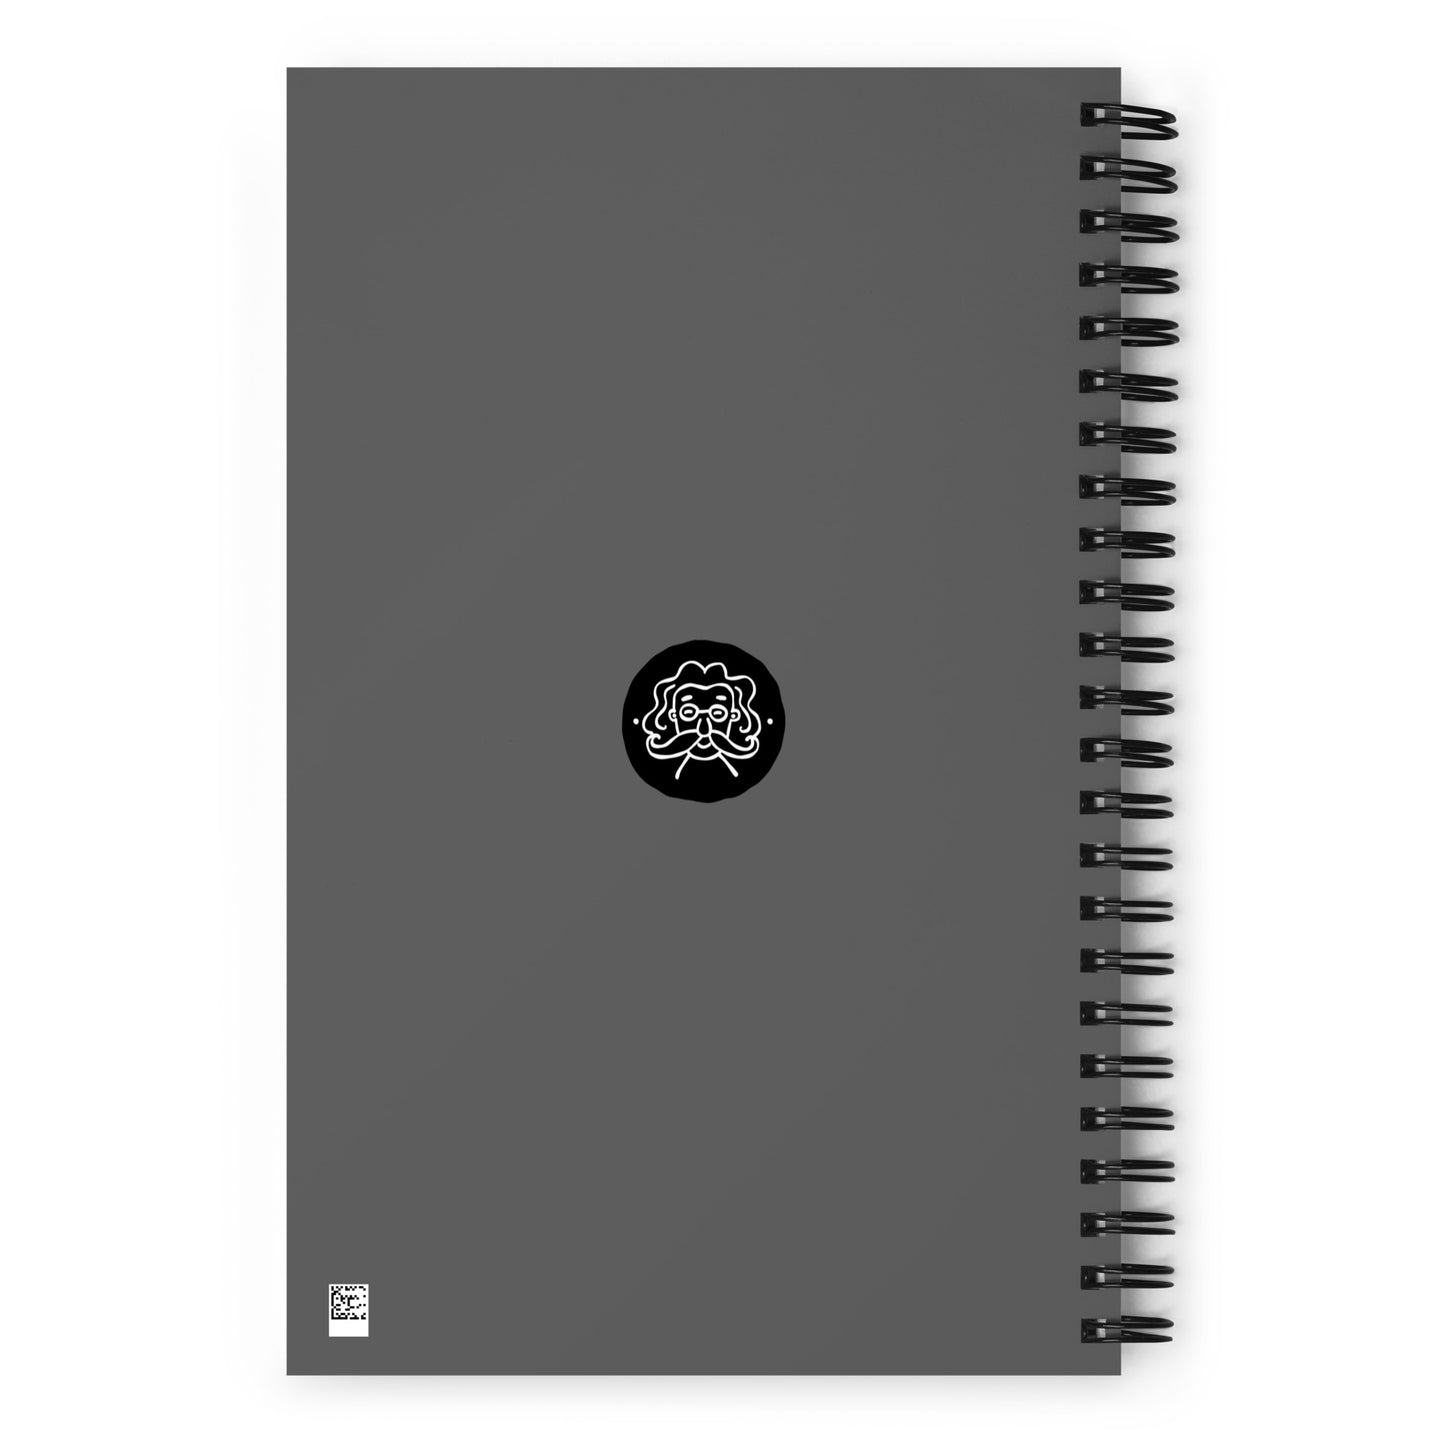 Spiral notebook personalised - Graduation